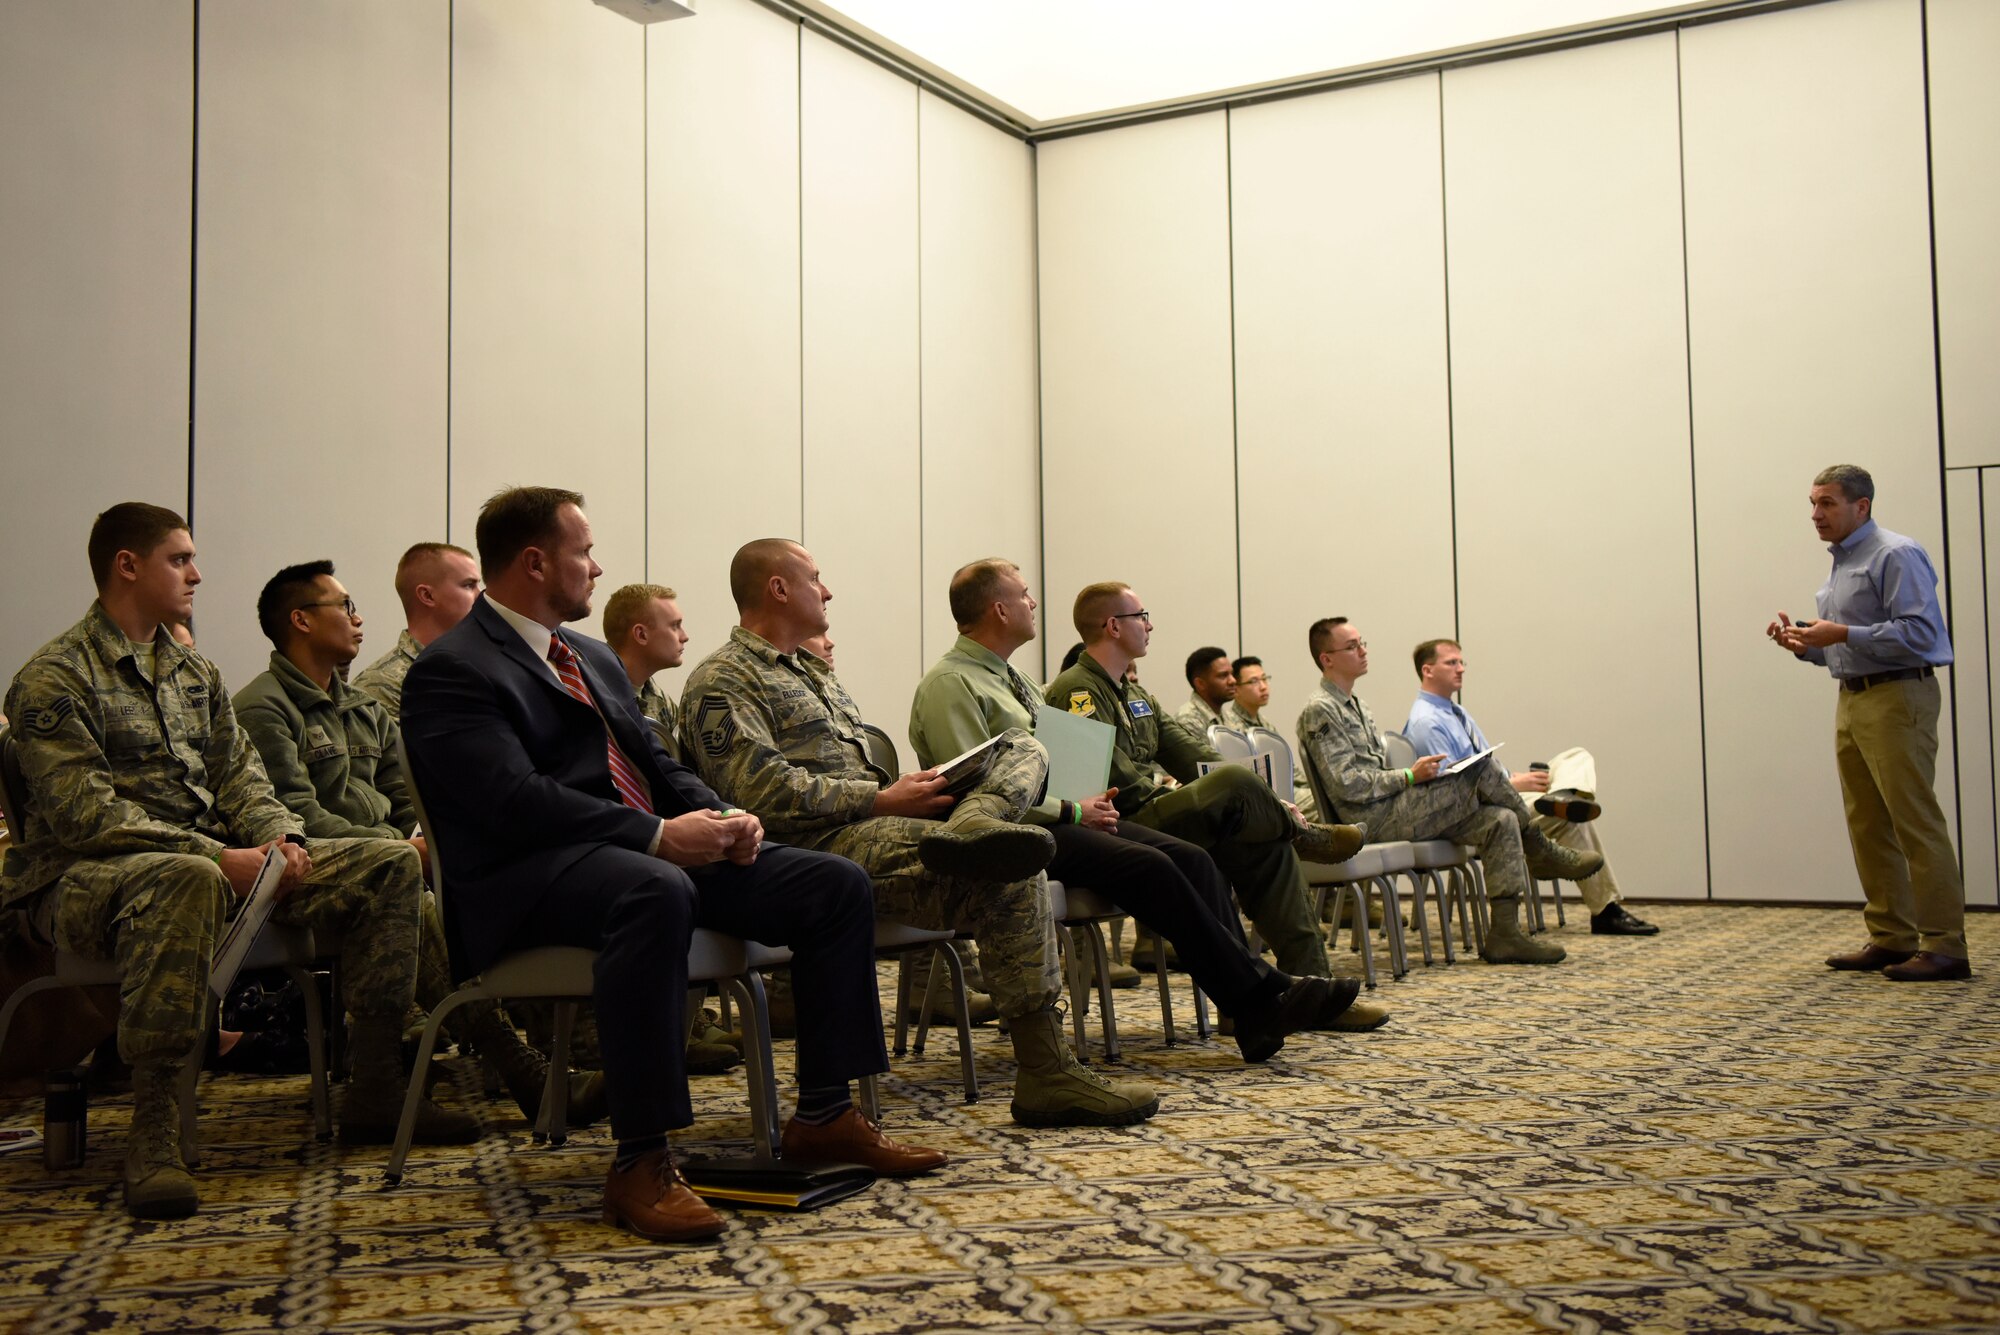 Team Dover members attend an industry brief by a representative of Lockheed Martin during the Hiring Our Heroes Military Transition Summit April 12, 2018, at Dover Air Force Base, Del. More than five different businesses provided employment briefs to the members of Dover AFB. (U.S. Air Force photo by Airman 1st Class Zoe M. Wockenfuss